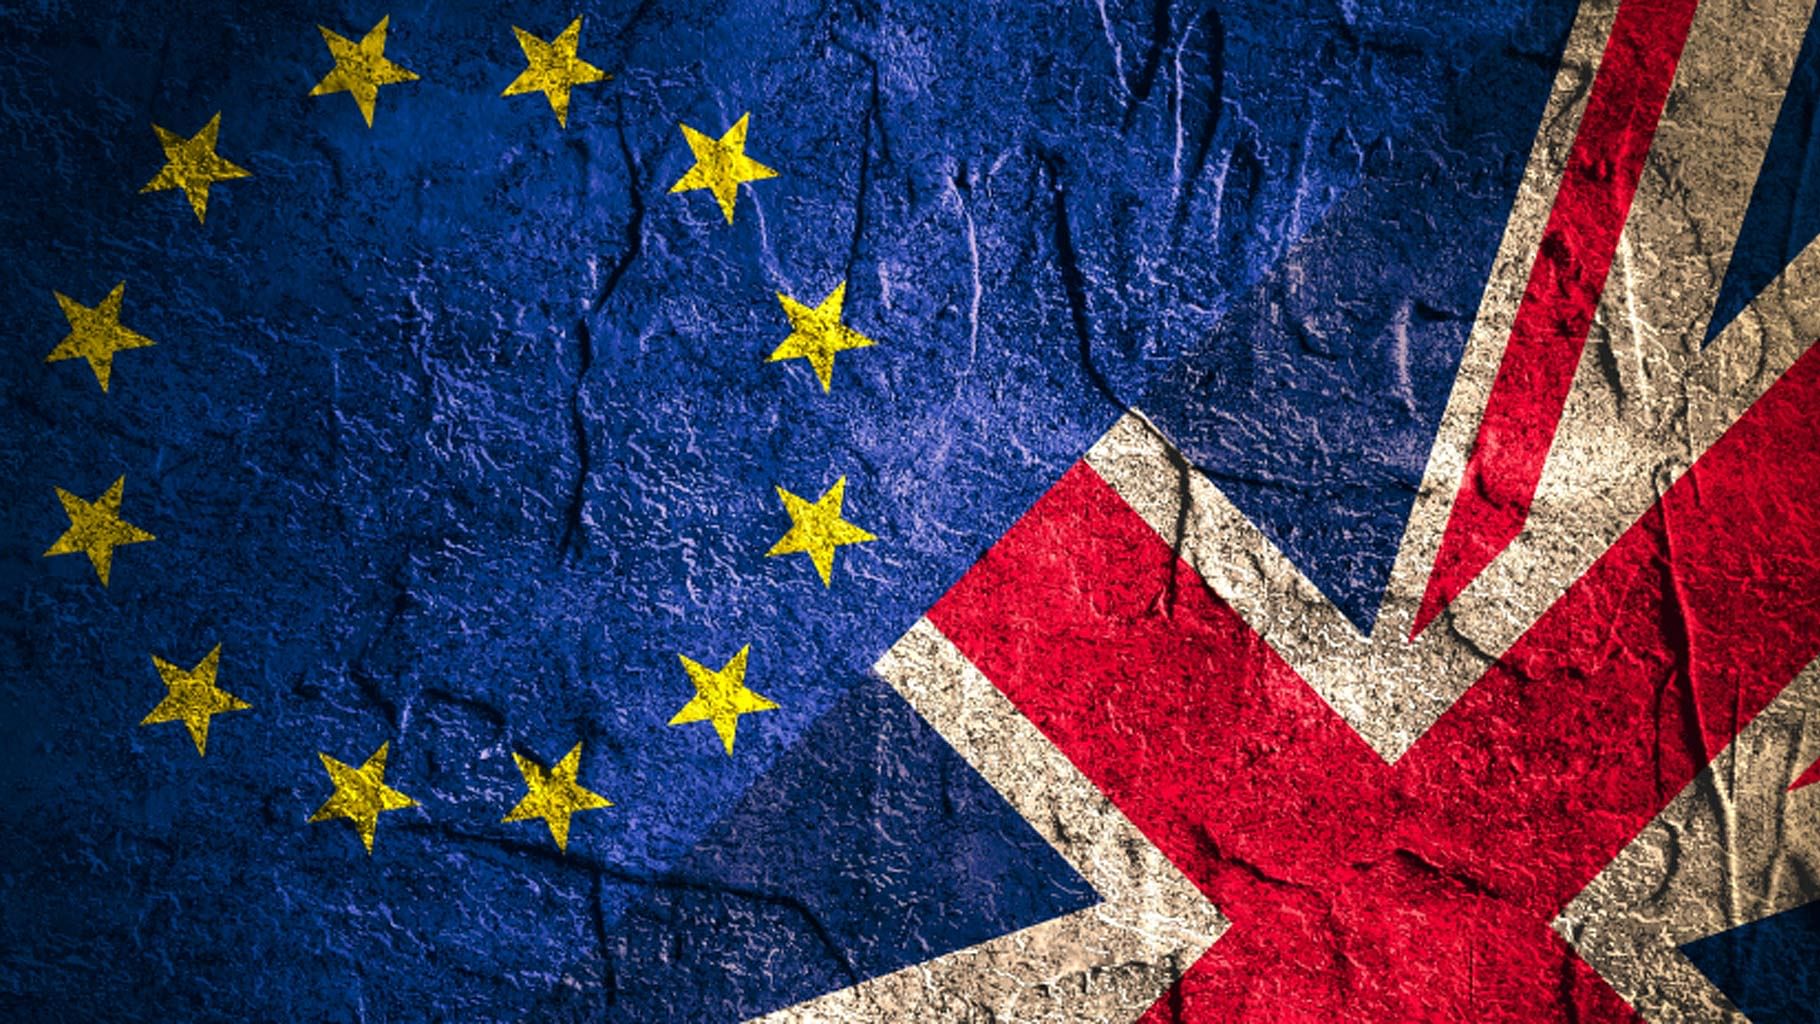 Britain vote on the “Brexit” issue. (Photo: iStock)